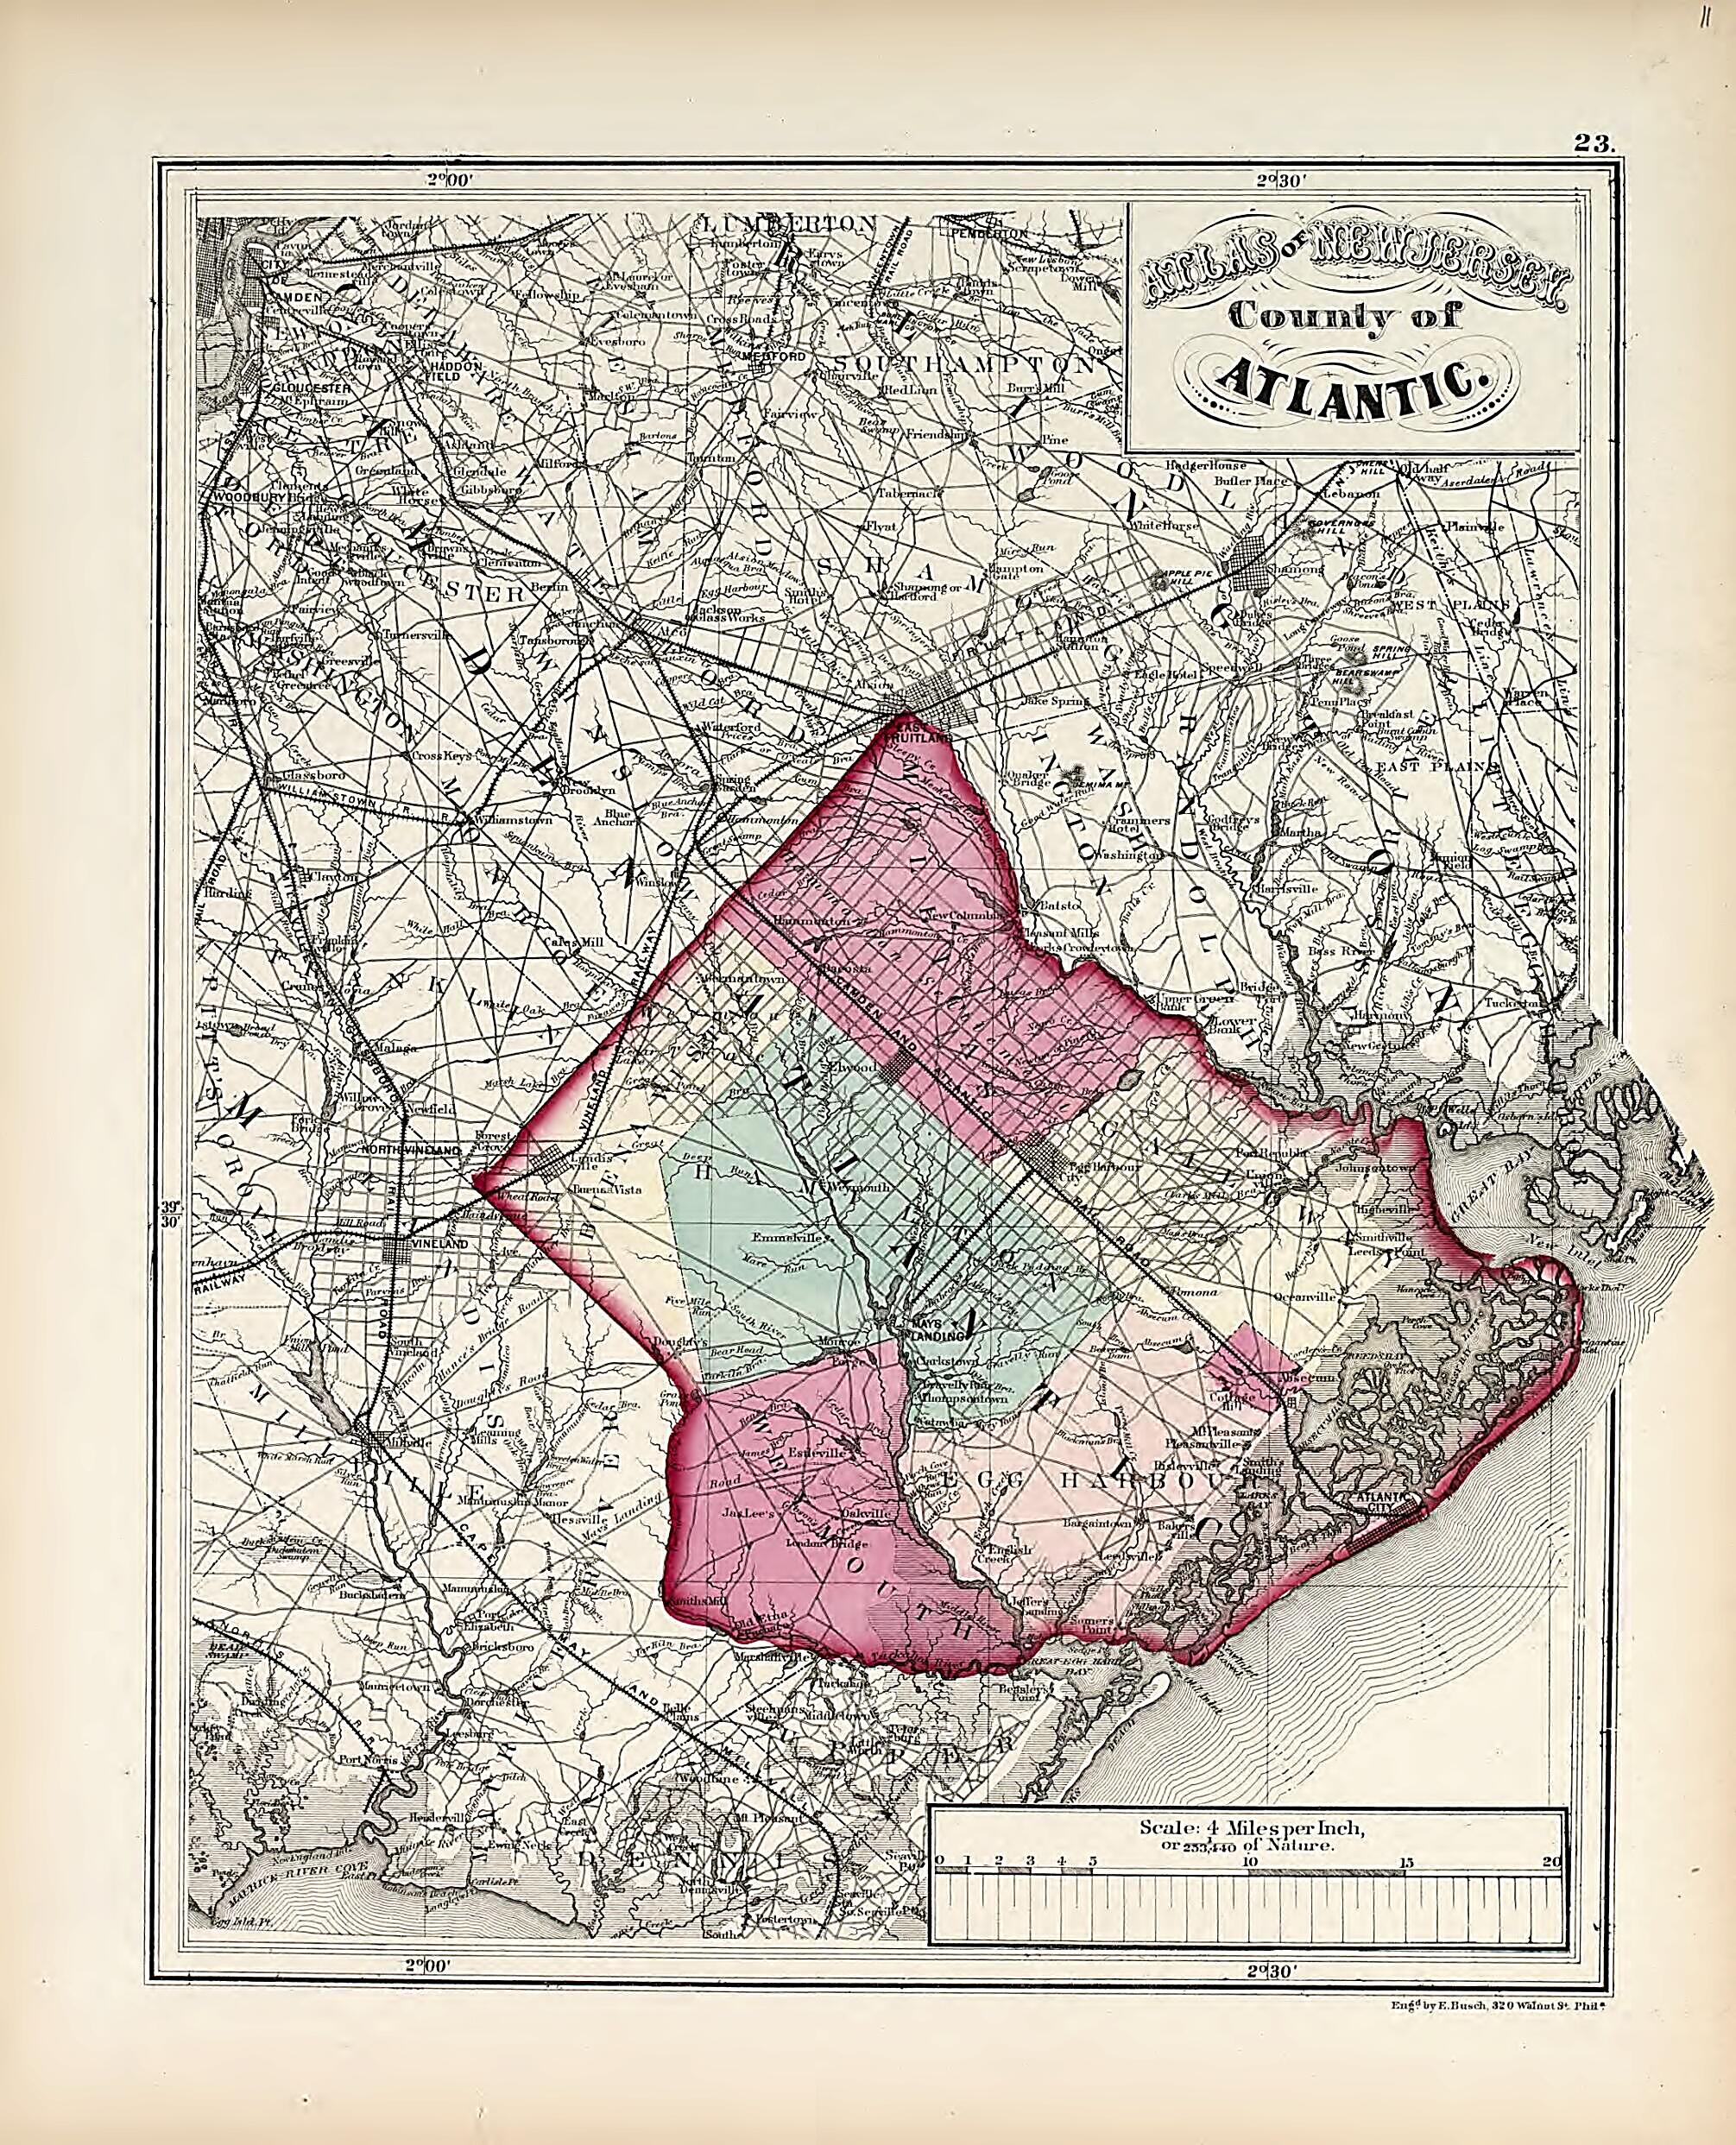 This old map of County of Atlantic from Atlas of the Late Township of Greenville, and the State of New Jersey from 1873 was created by Griffith Morgan Hopkins in 1873